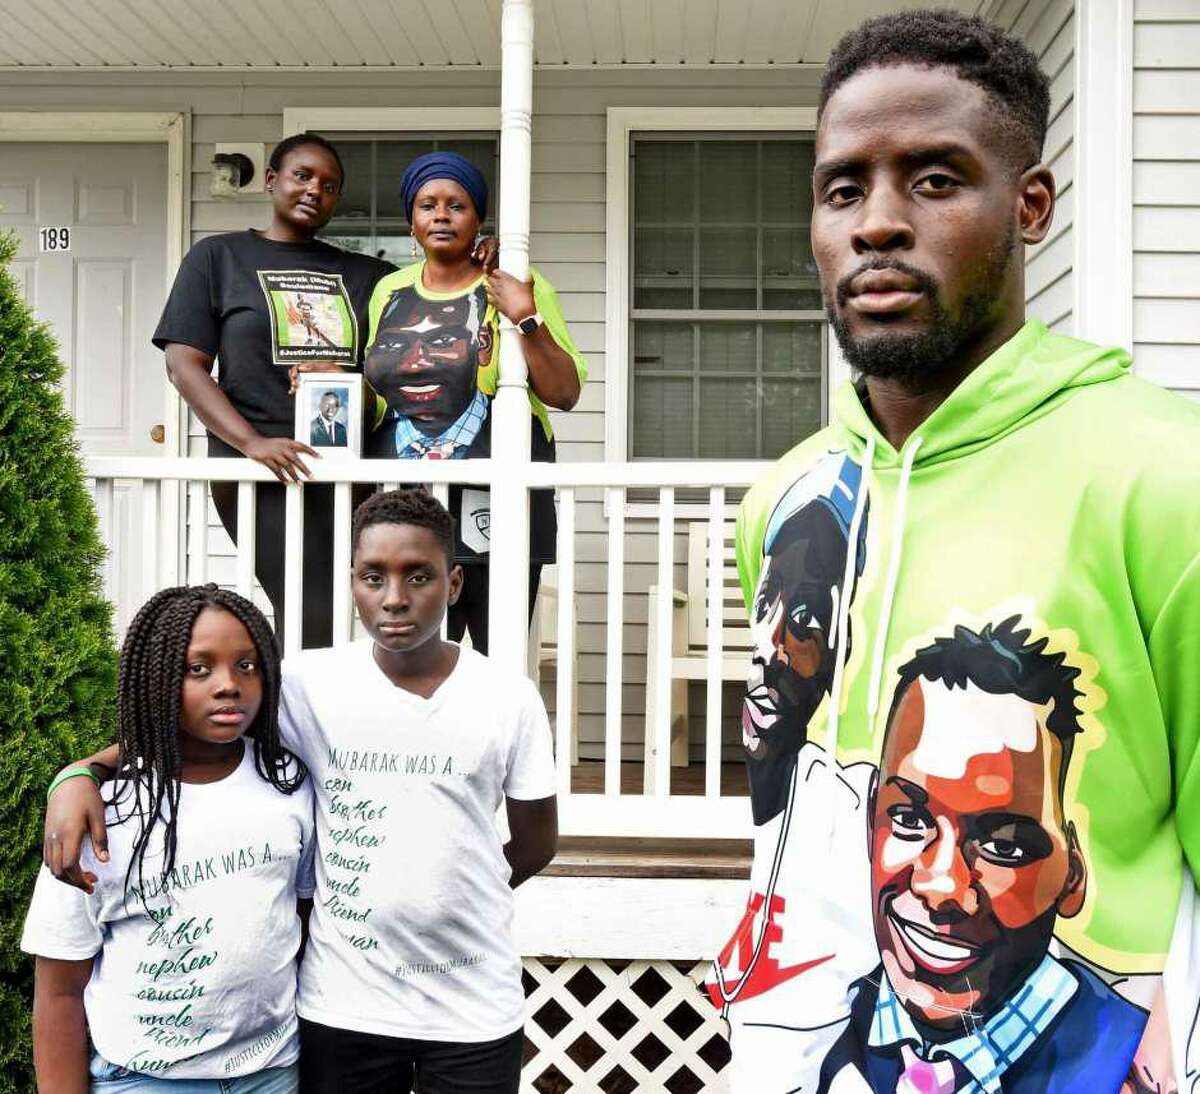 In this recent file photo, the  family of Mubarak Soulemane stands in front of their New Haven home. Mubarak Solulemane was fatally shot by a state trooper near I-95 off of exit 43. Standing on the porch, right rear is the mother of Mubarak Soulemane, Omo Mohammed. Mubarak's siblings from left rear to right: Mariyann Soulemane; Sirah Bandeh, 9; Ishamel Photo: Peter Hvizdak / Hearst Connecticut Media